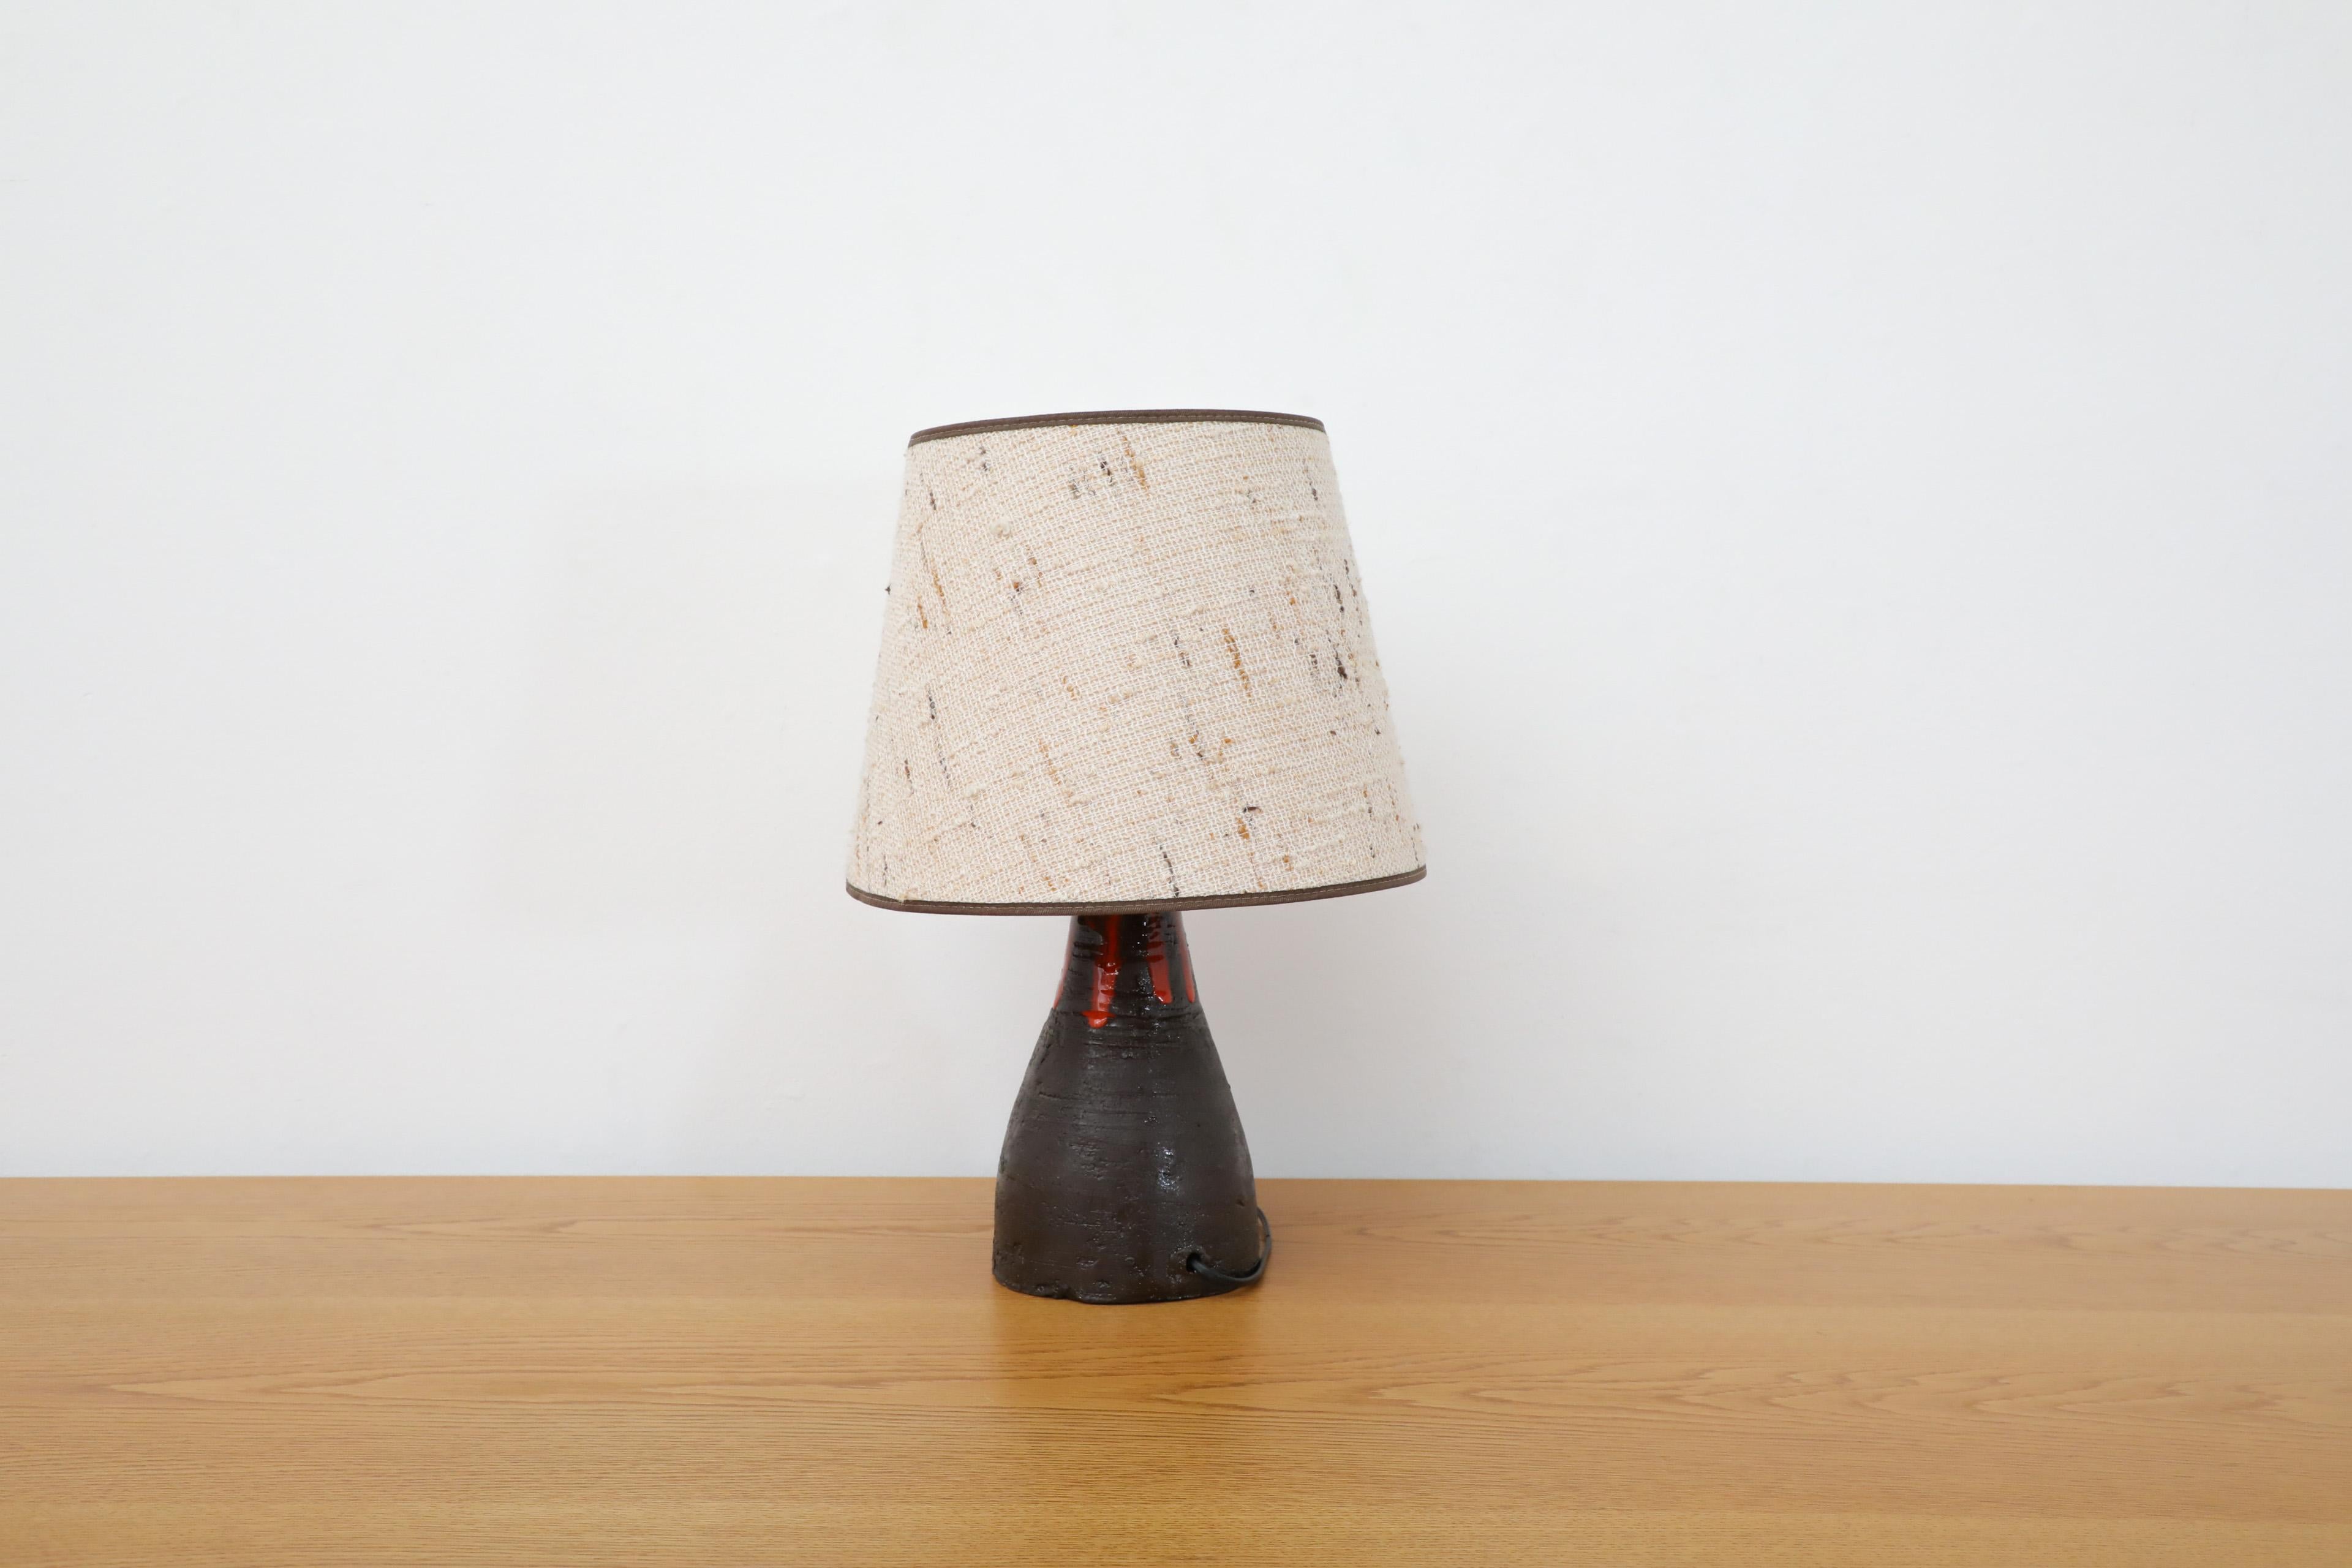 Metal Dutch Mid-Century Black Ceramic Volcanic Table Lamp w/ Red Dripping Effect Glaze For Sale